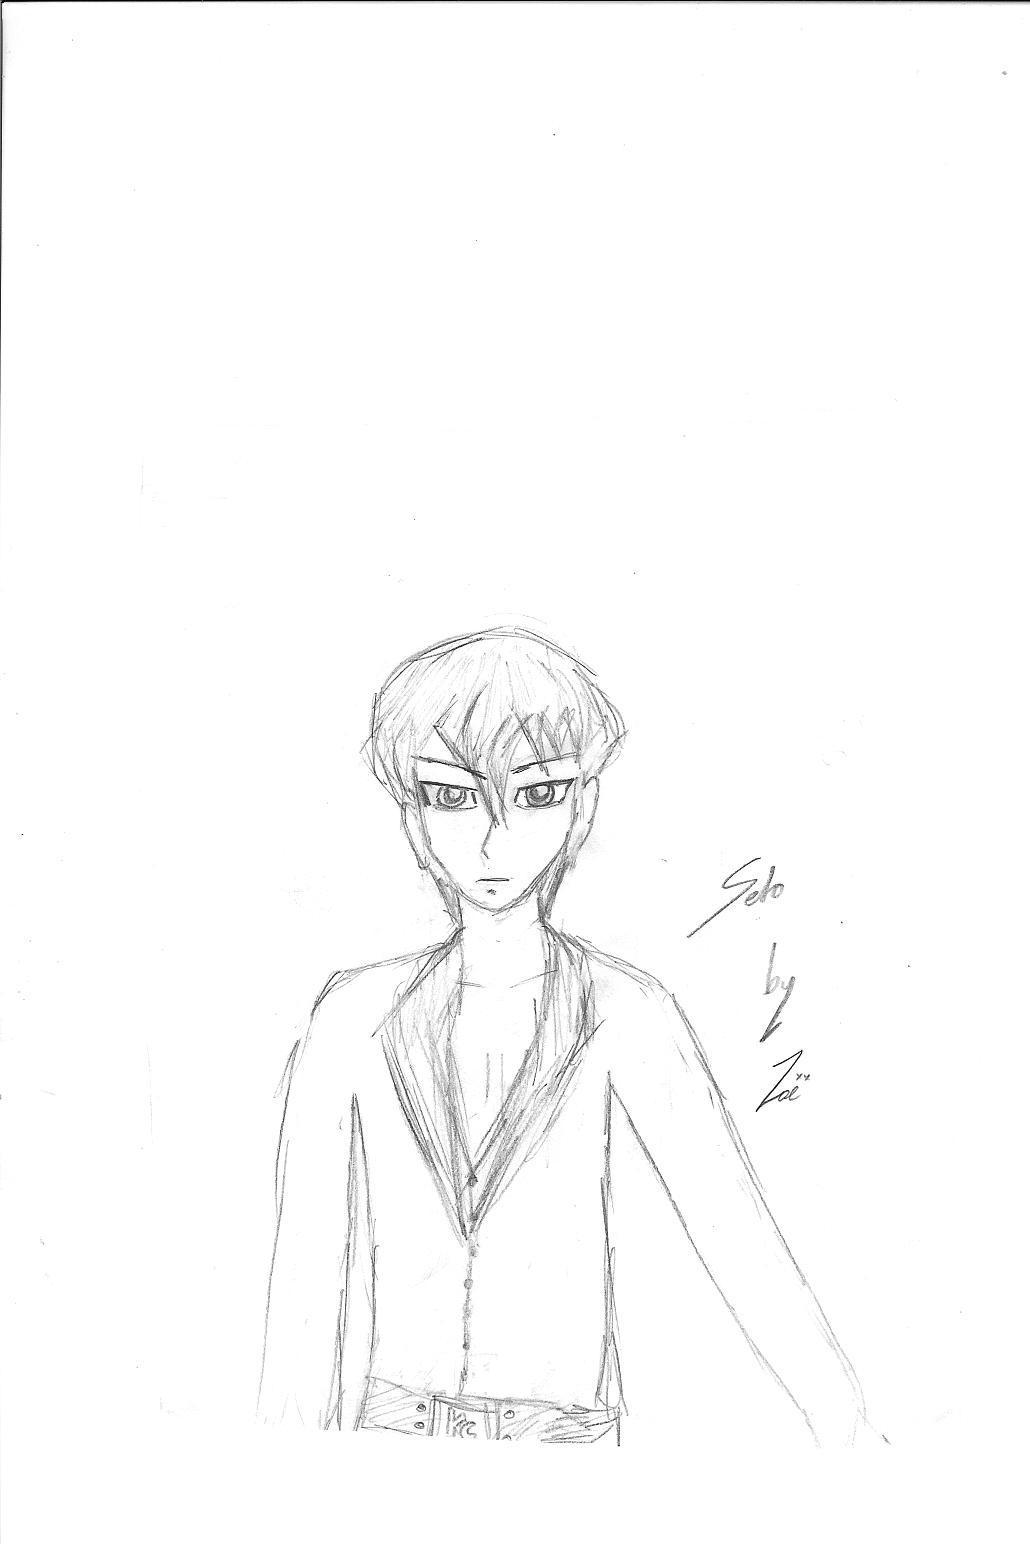 Seto Kaiba with his shirt unbuttoned at the top by behappyandsing